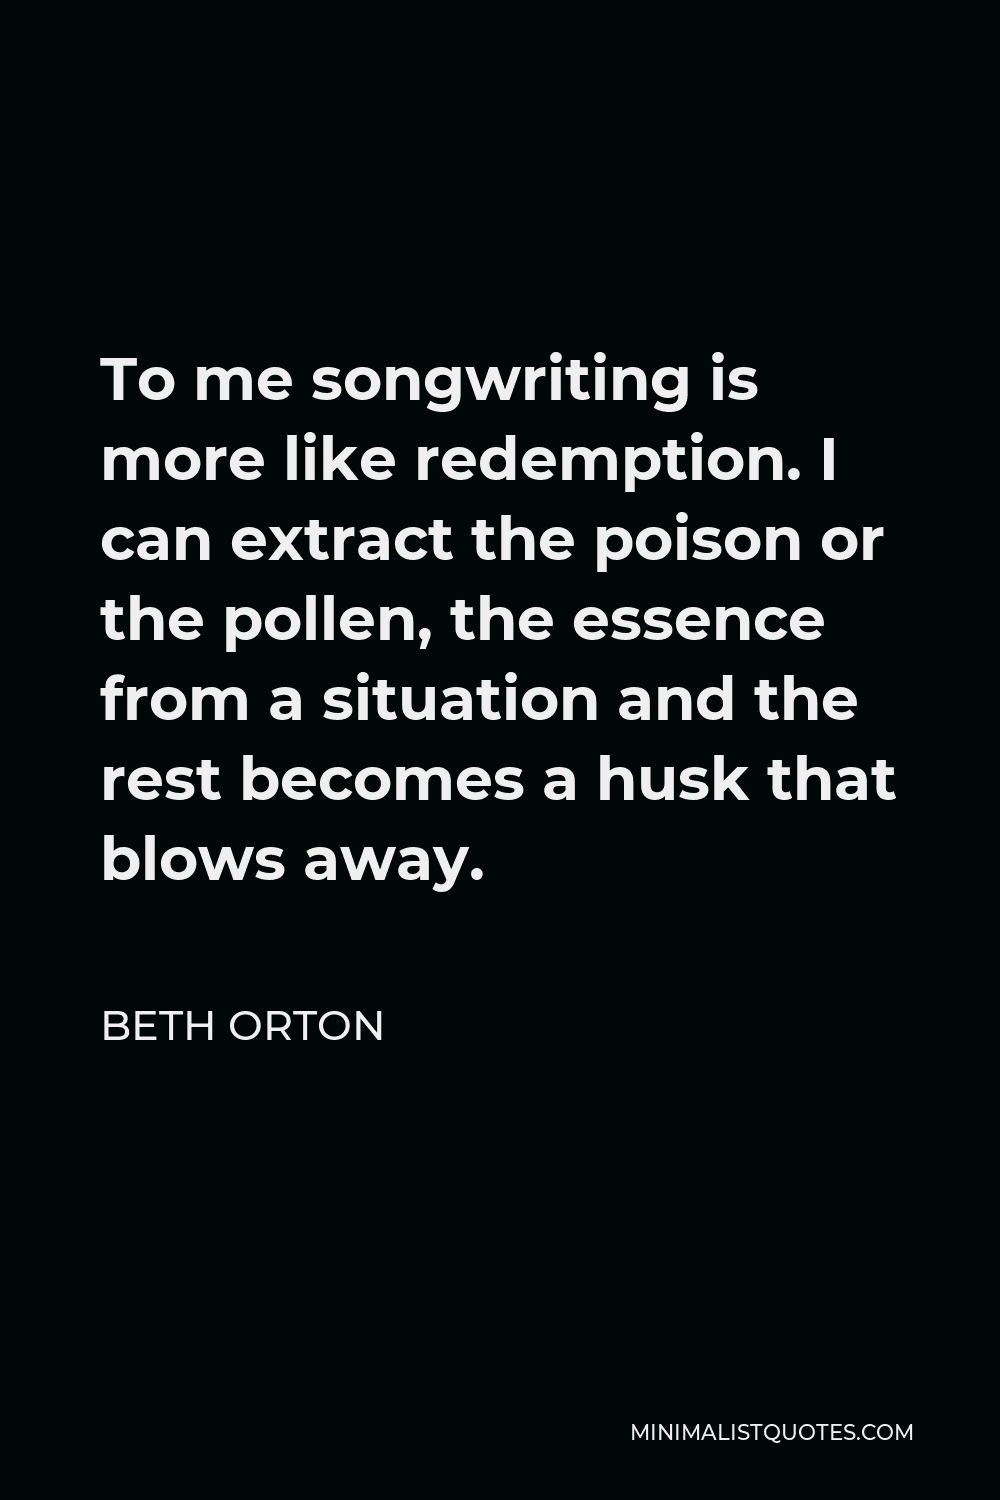 Beth Orton Quote - To me songwriting is more like redemption. I can extract the poison or the pollen, the essence from a situation and the rest becomes a husk that blows away.